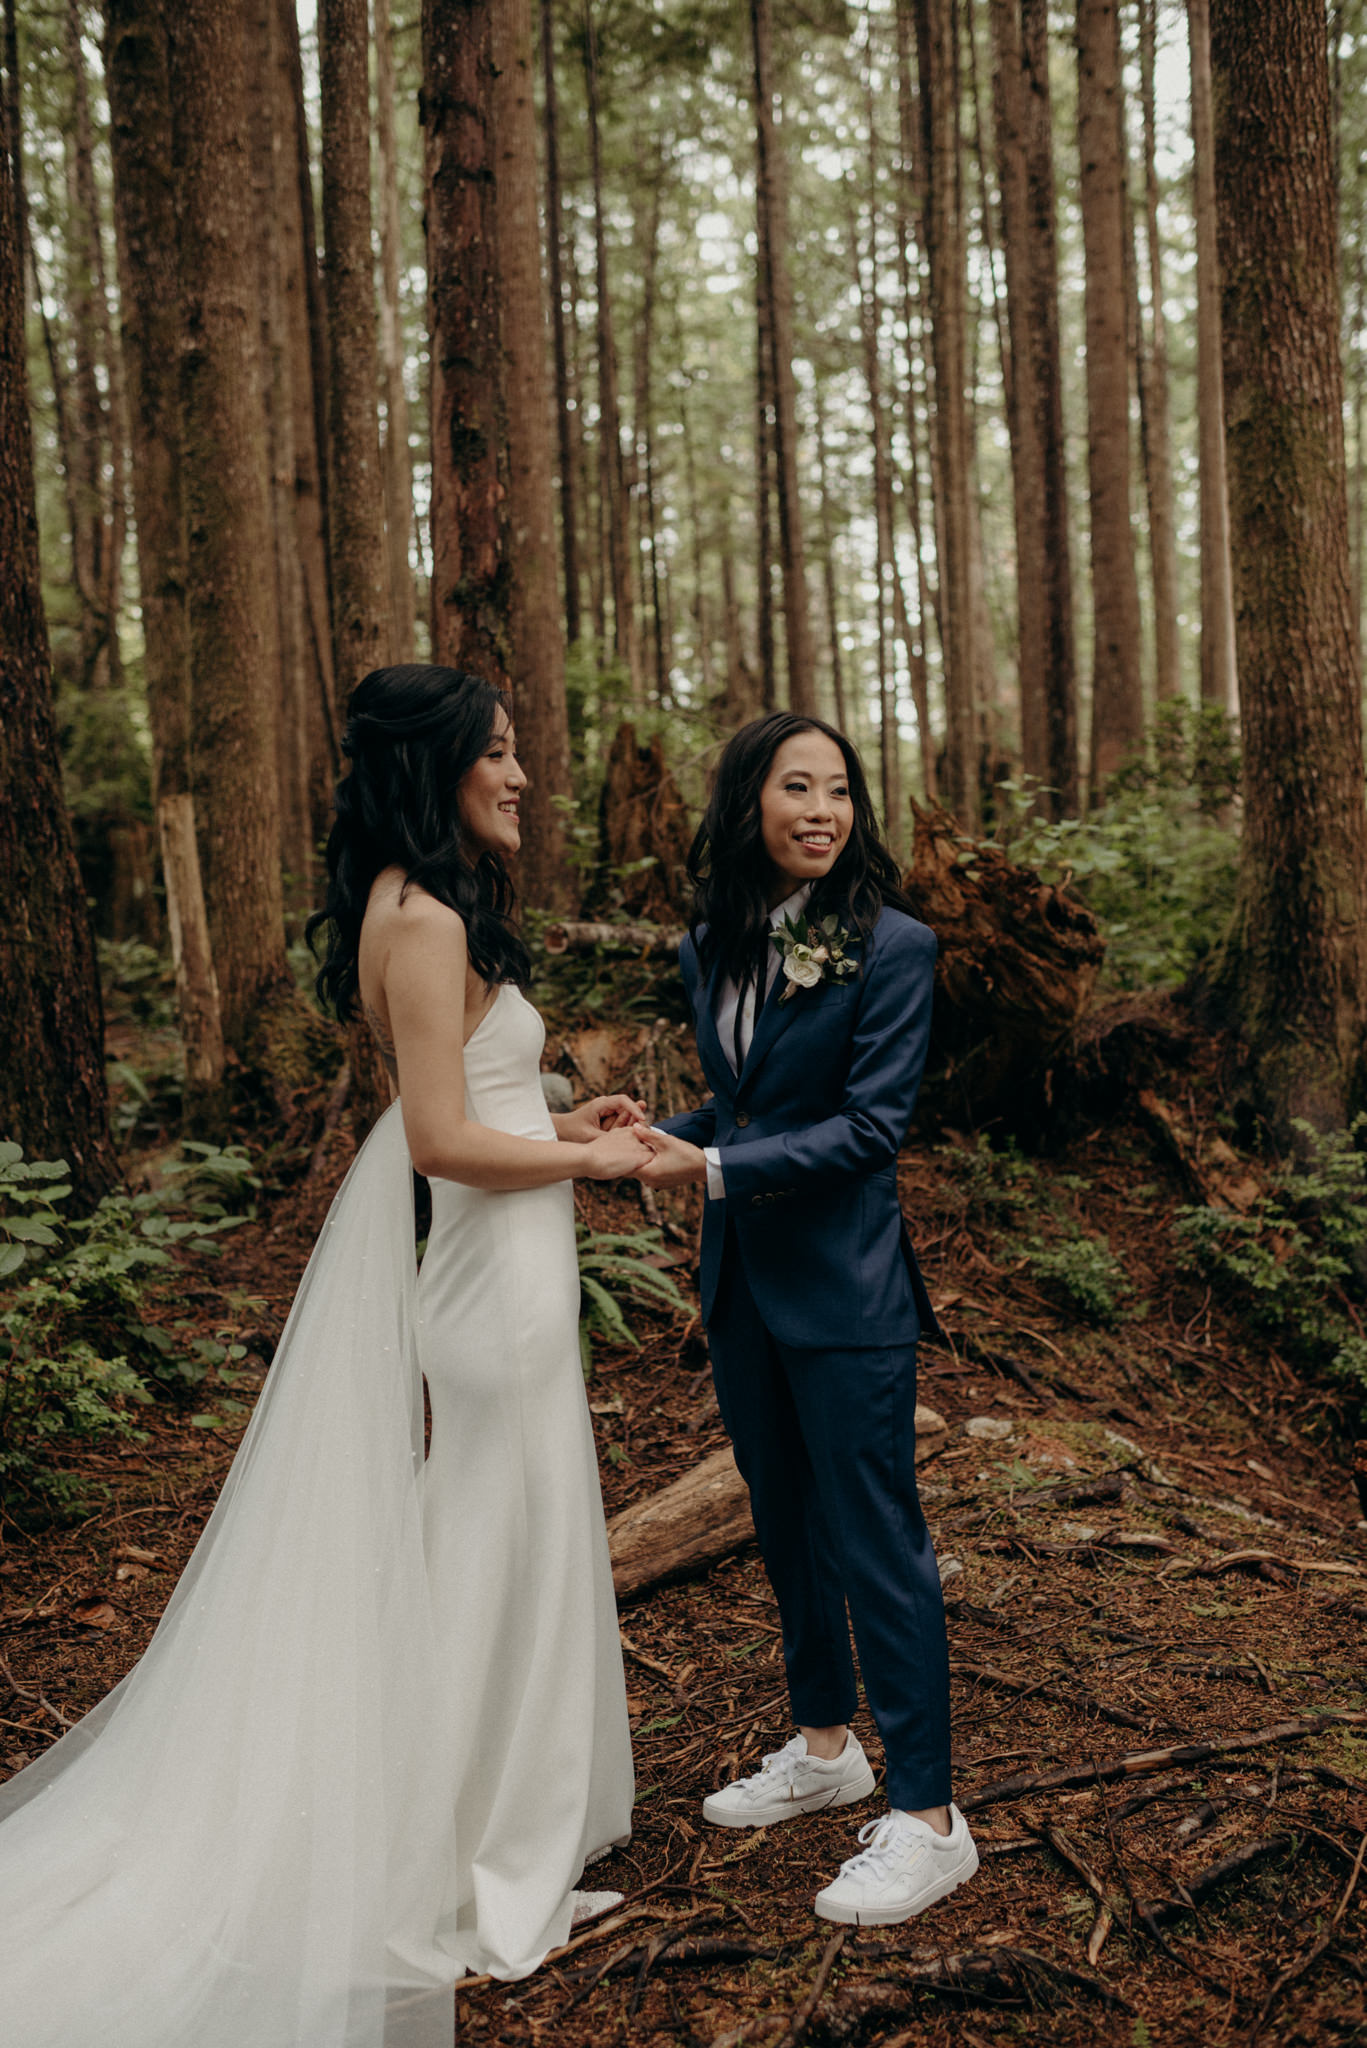 Same sex elopement ceremony in forest in Tofino